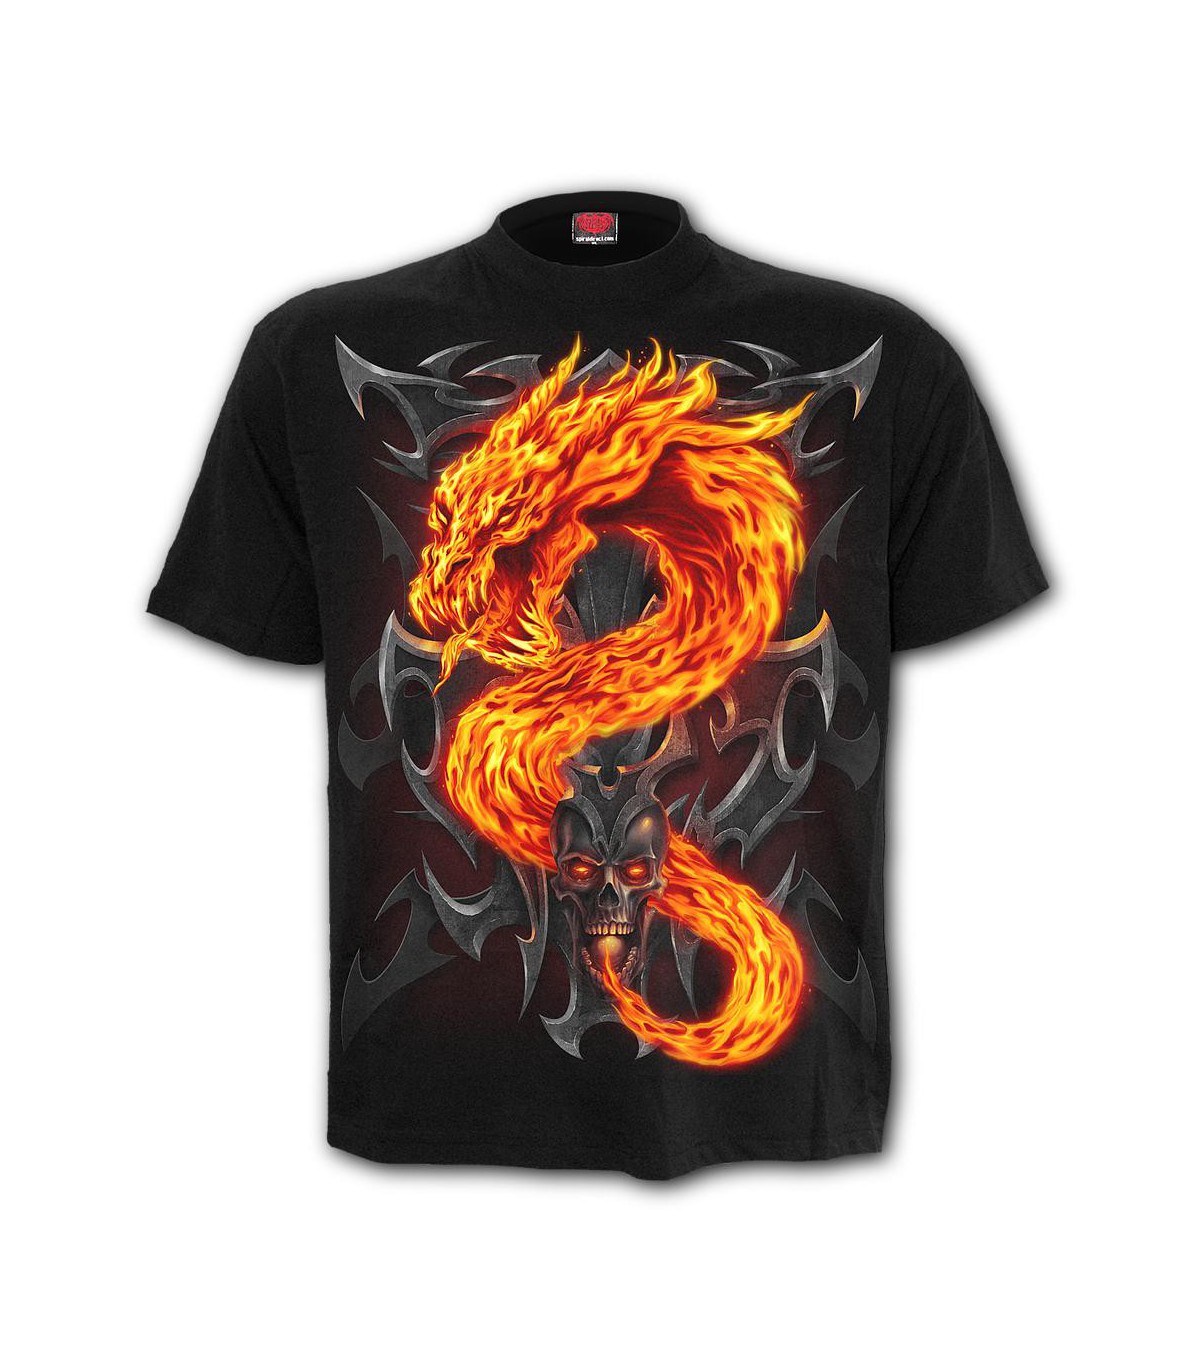 Year of the Dragon with Red flames Child Medium T shirt 